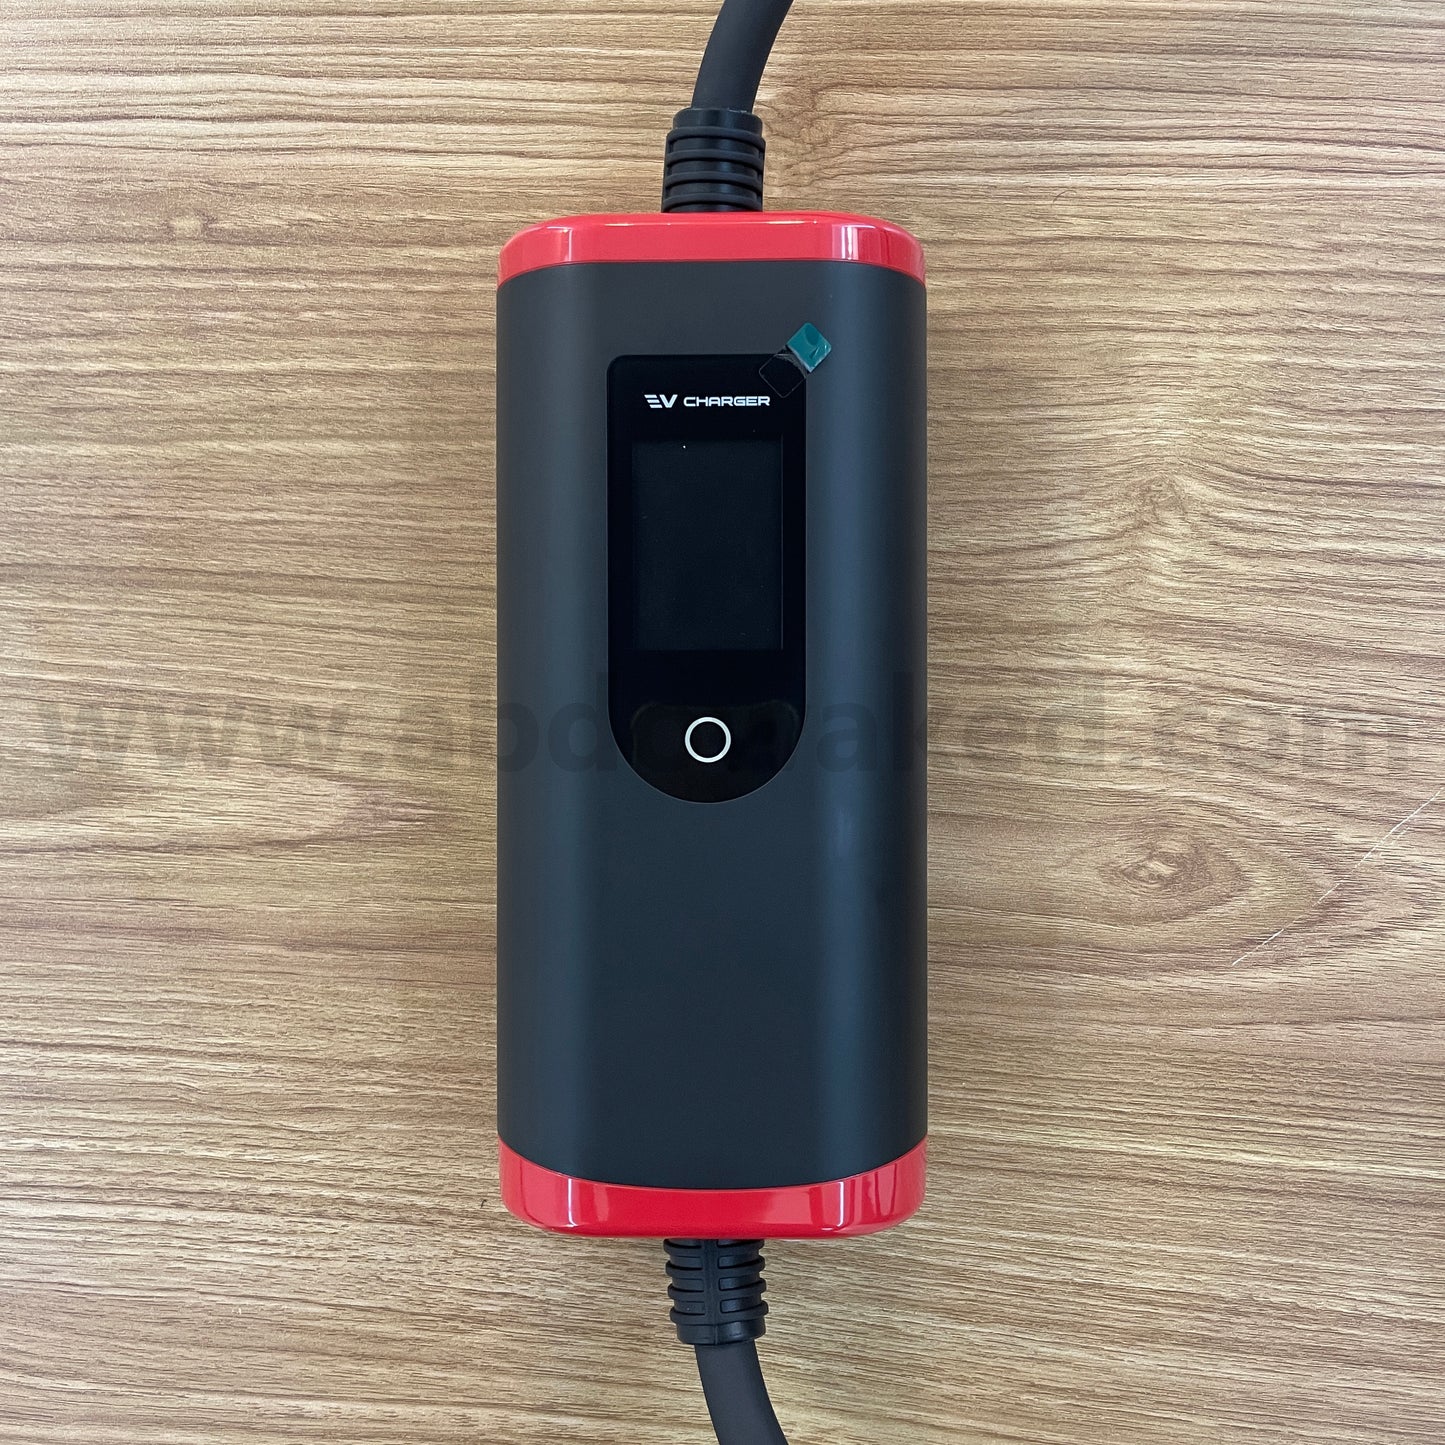 Electric Car | EV Charger For All Brands (New)